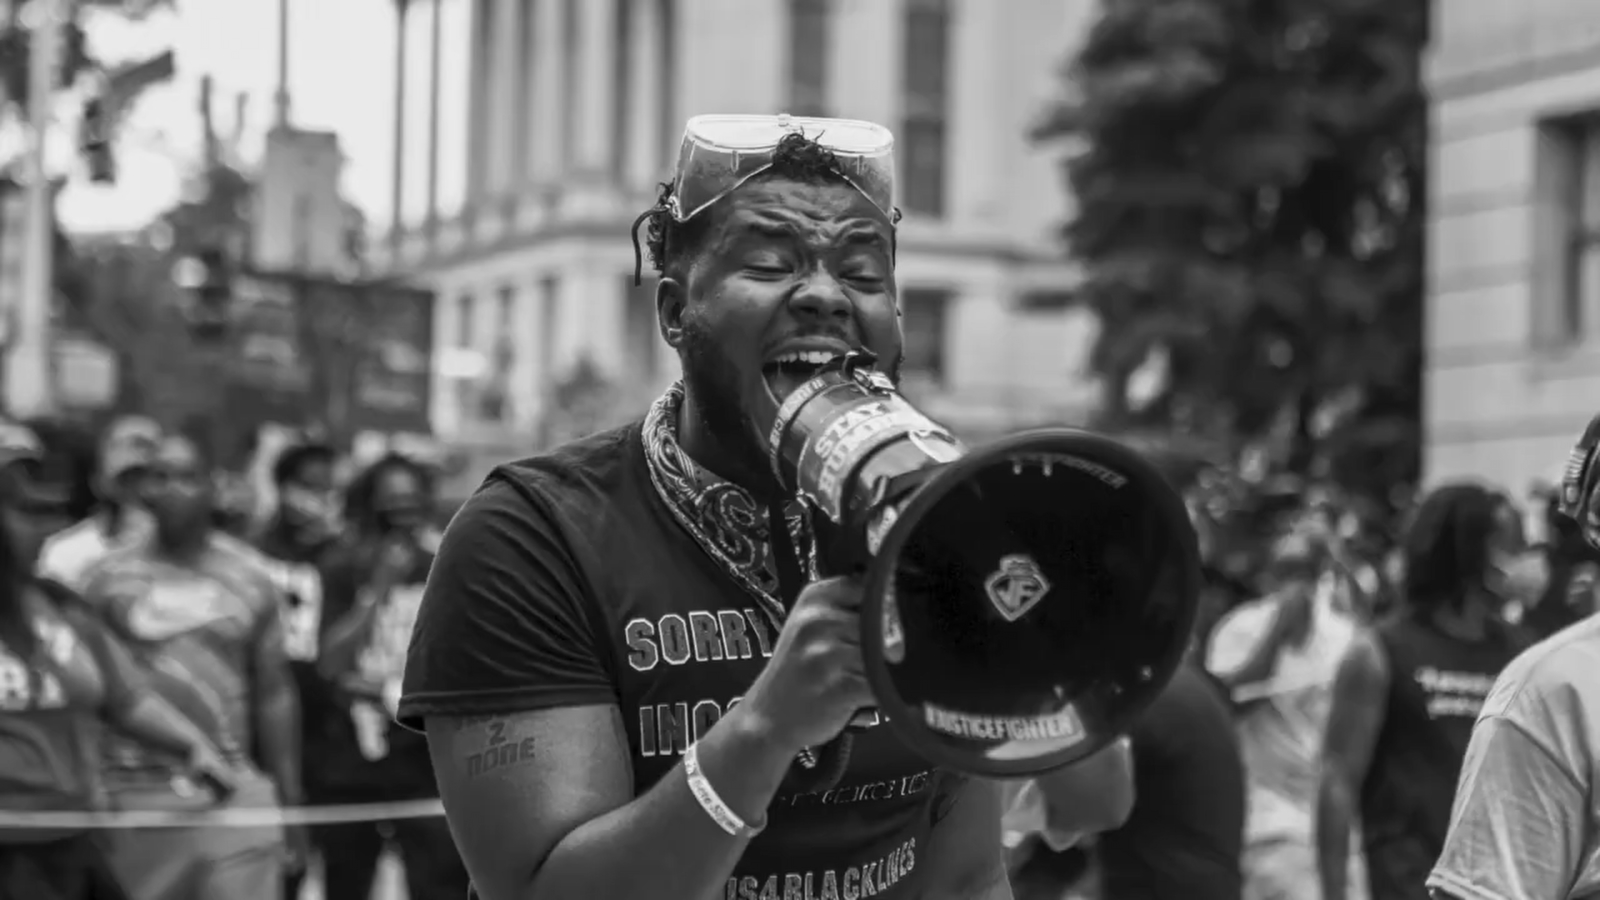 How Video Content can Support your HR team Black and white headshot of an African American man with googles on his head holding a bullhorn talking to the crowd in a city